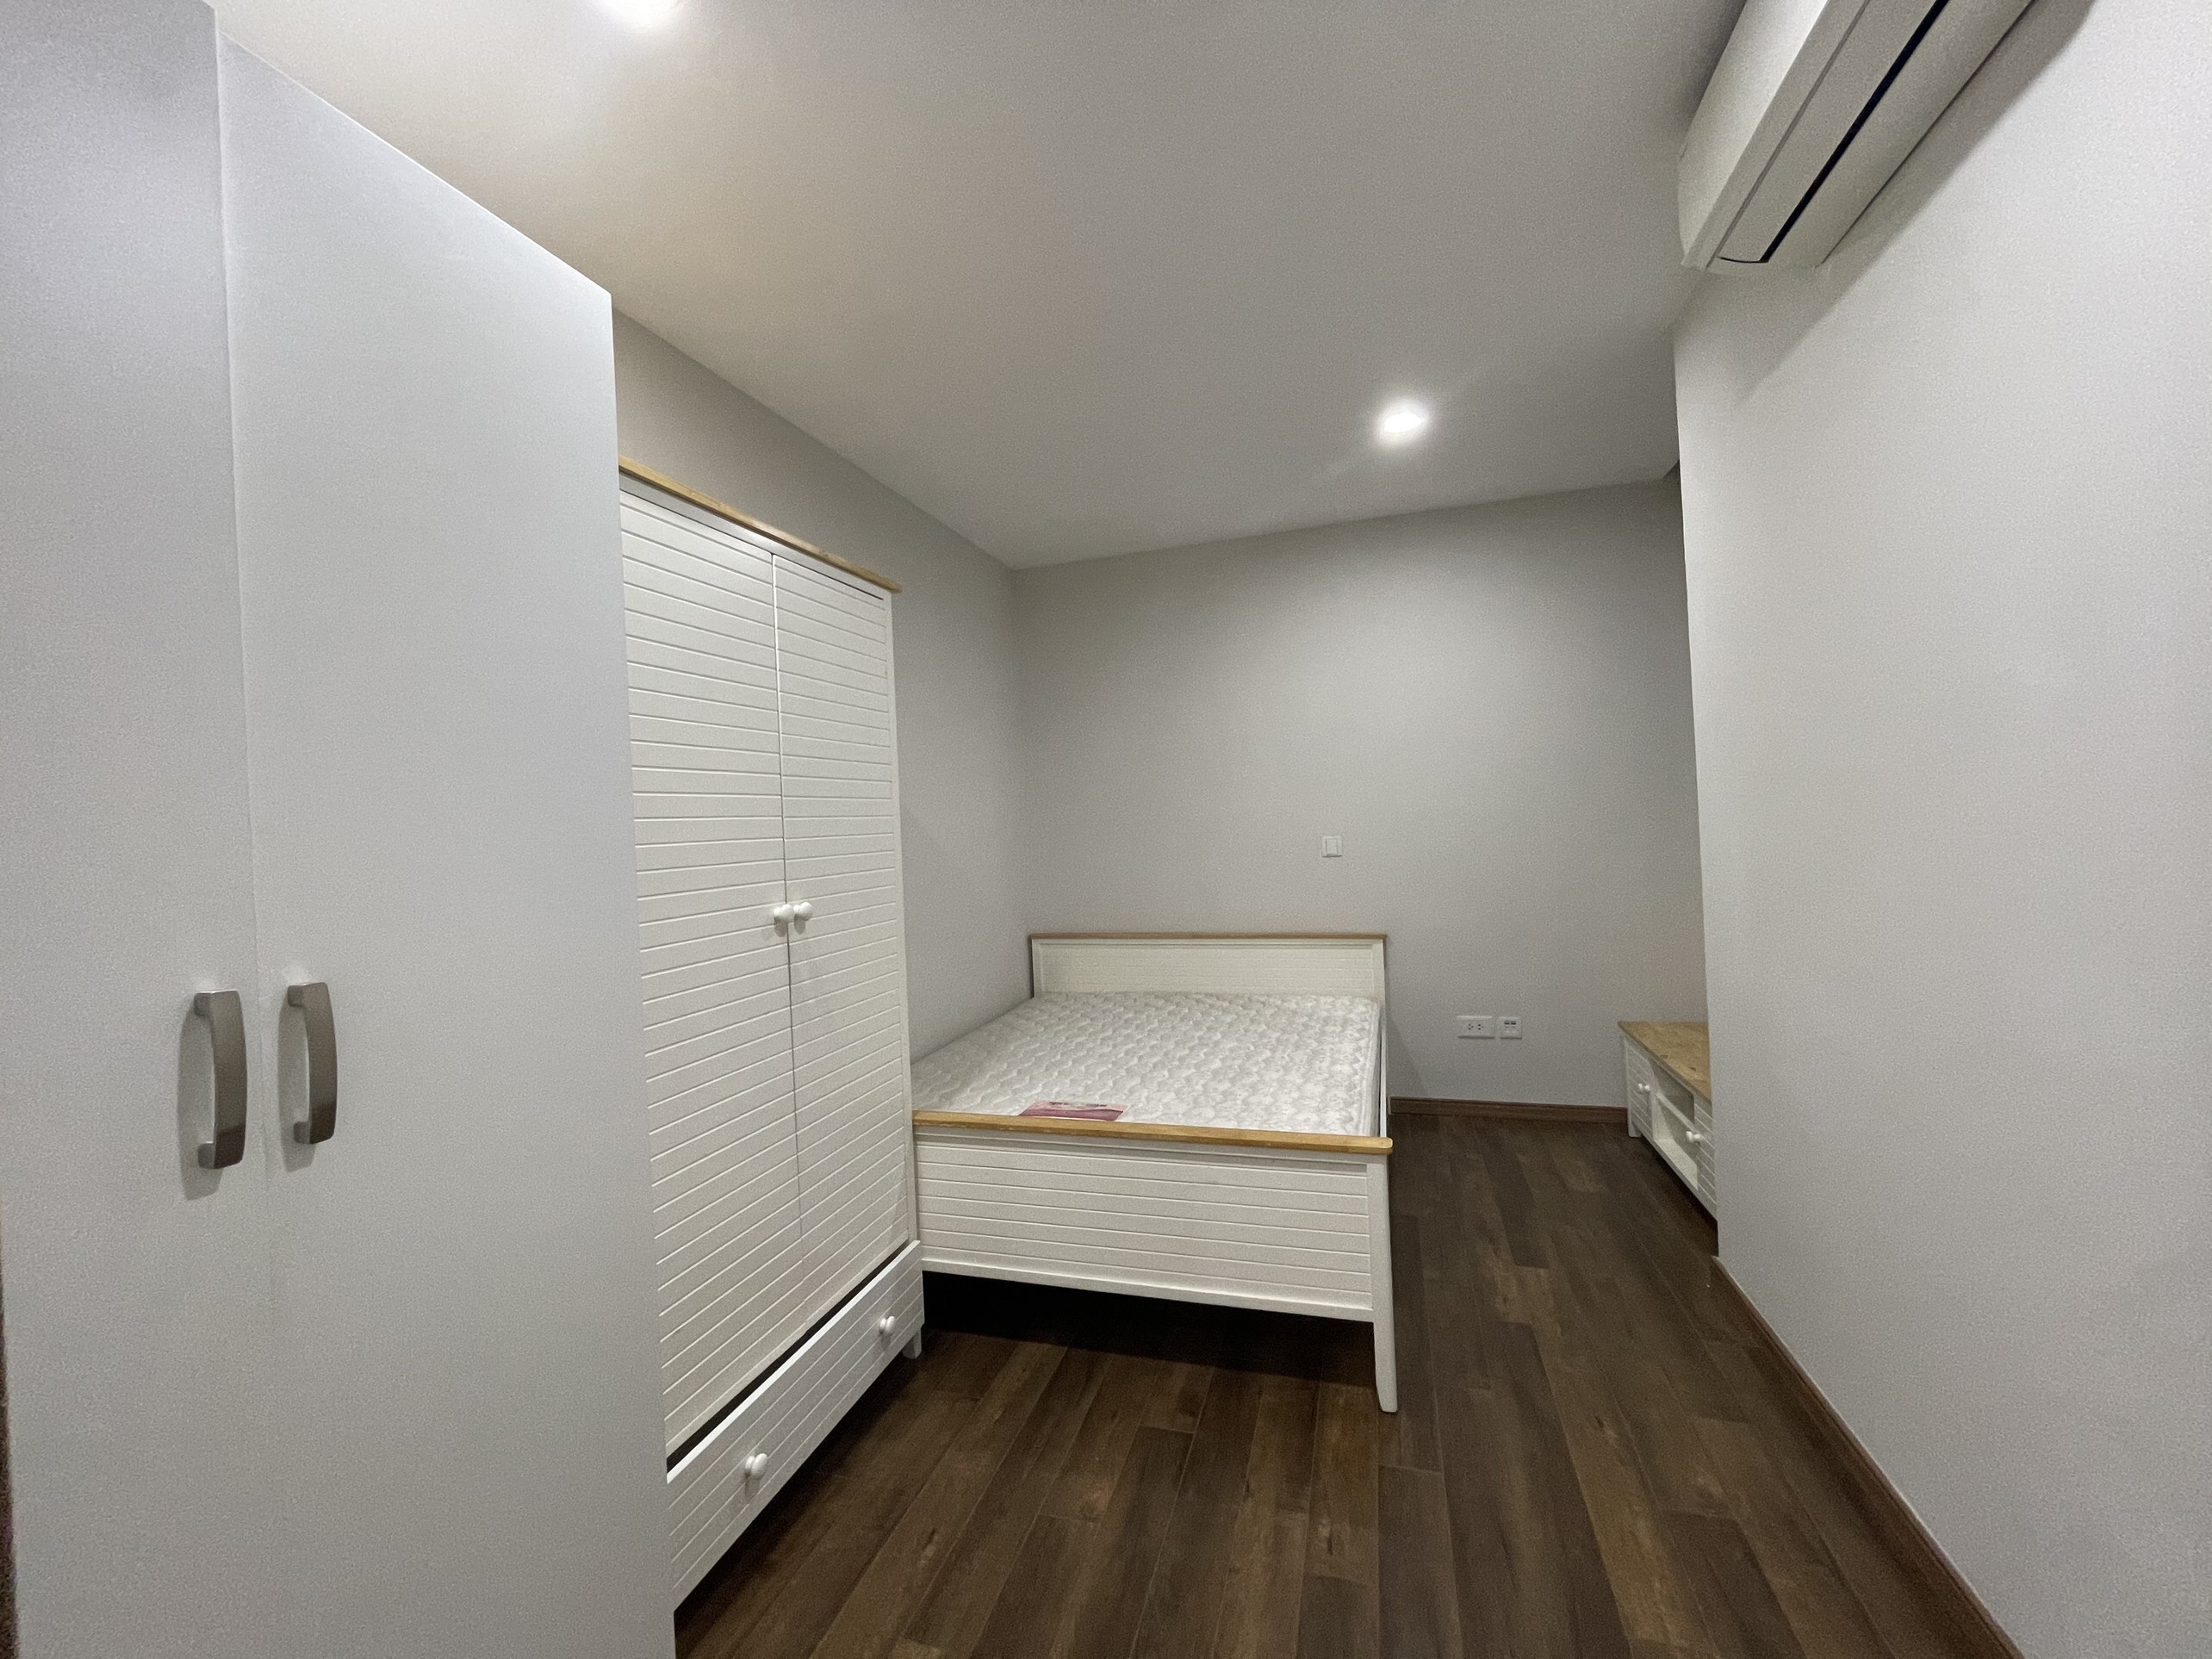 3BR Apartment in L4 tower Ciputra, fully furnished